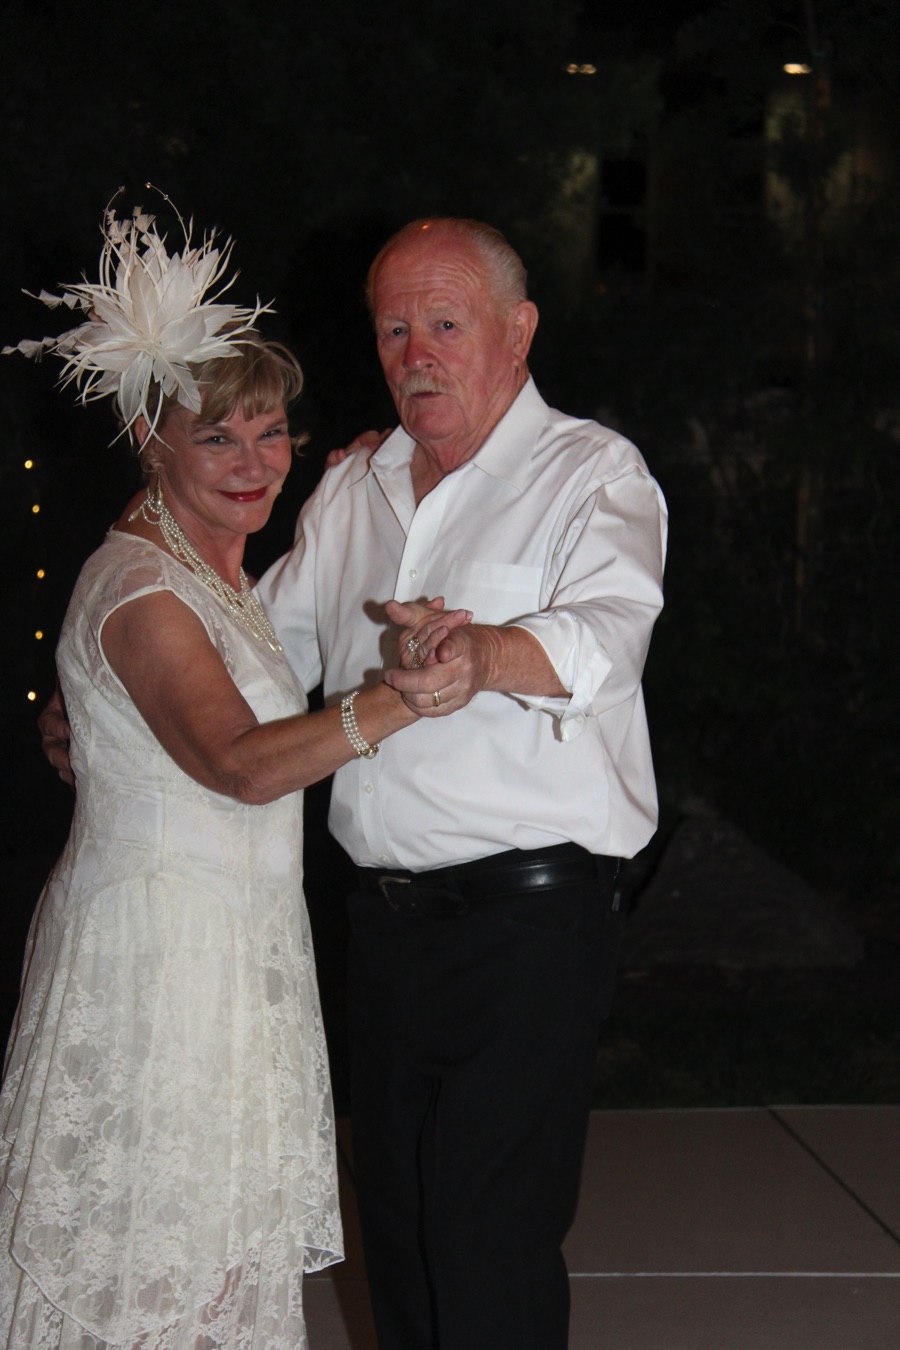 Dancing Under The Stars With Mary & Paul